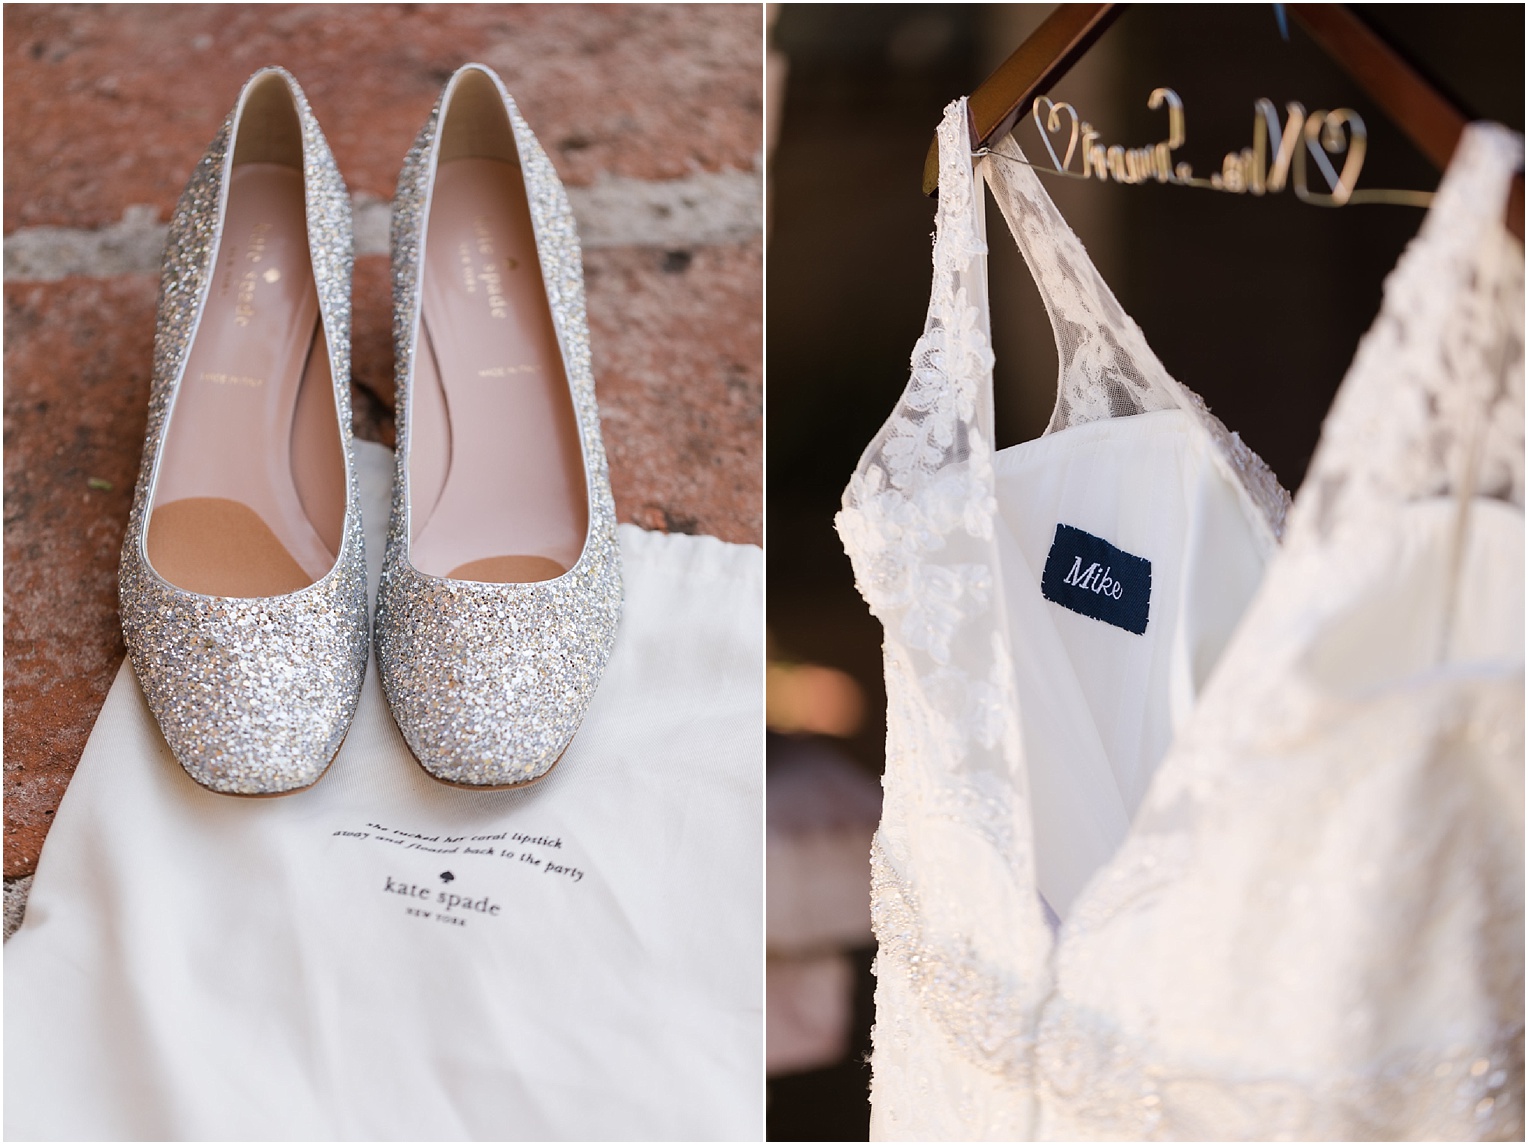 Tubac Golf Resort Wedding Tucson AZ Ashley and Paul rustic vintage shades of blue wedding with Kate Spade wedding shoes and embroidered dress